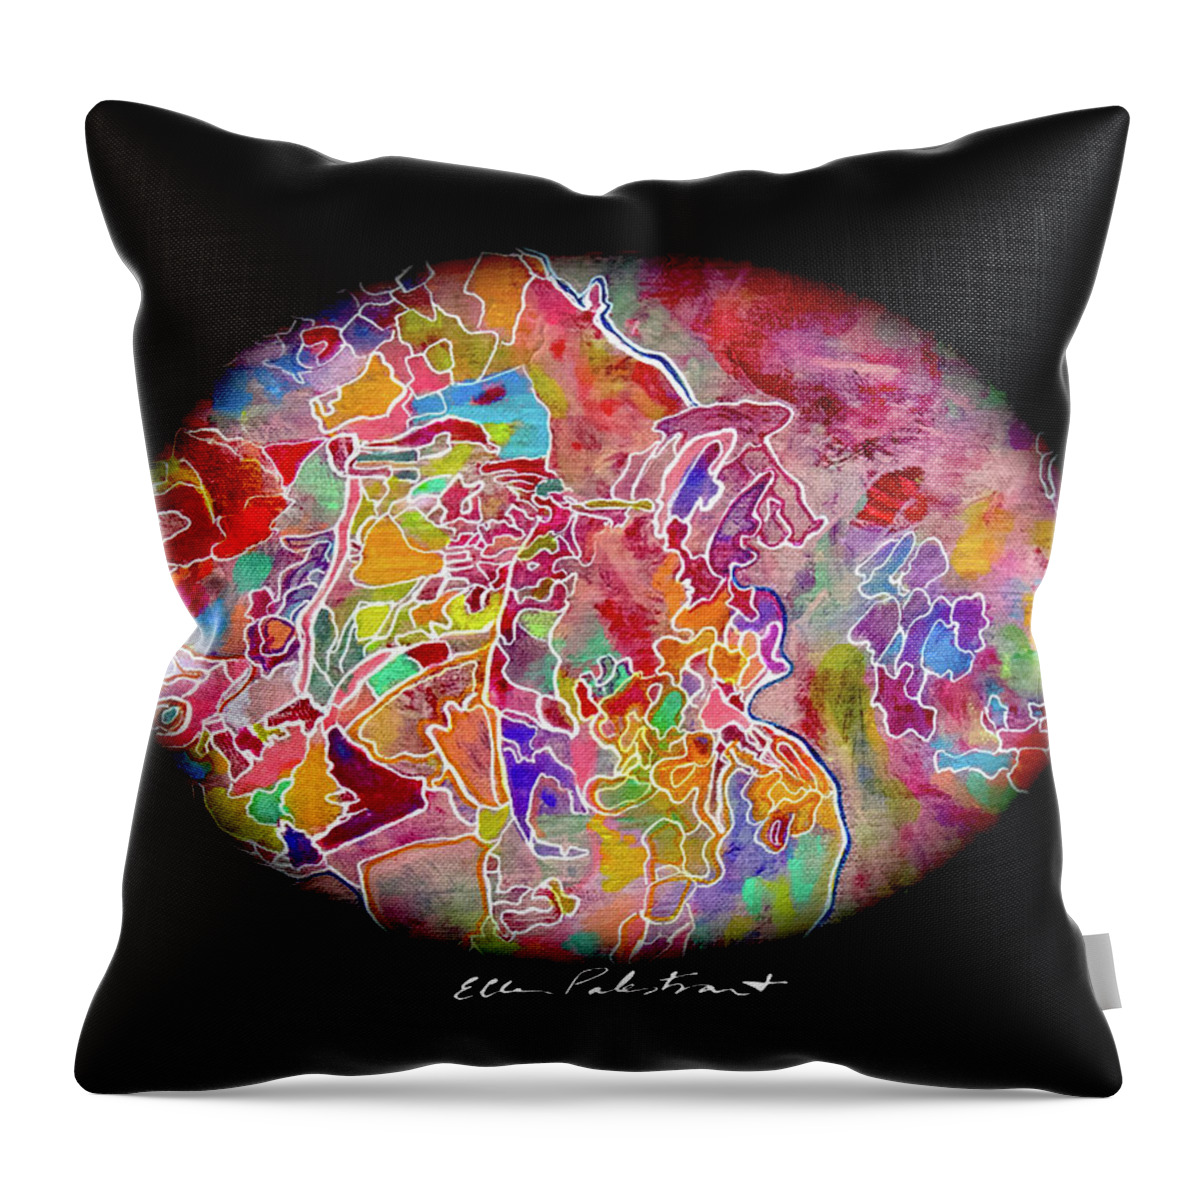 Wall Art Throw Pillow featuring the painting Life on a Spherical by Ellen Palestrant